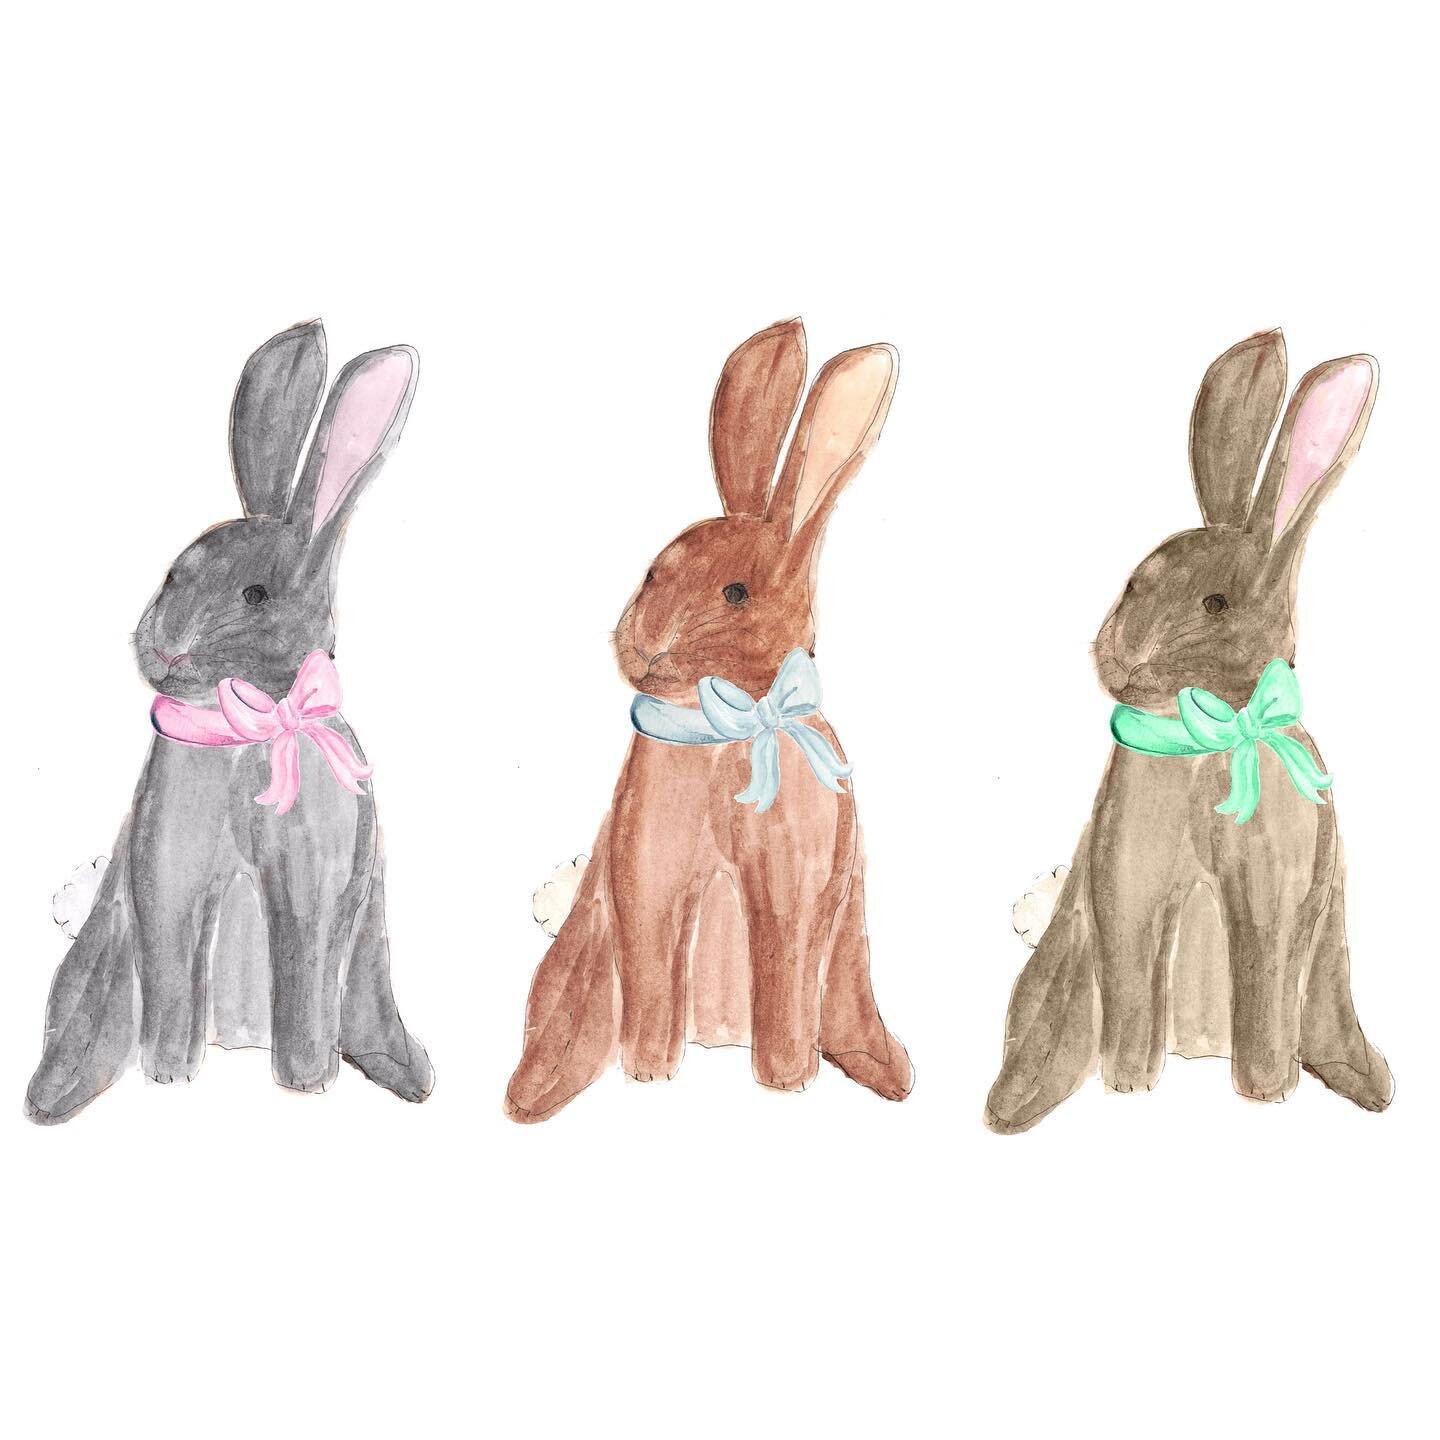 rabbit, rabbit, rabbit 🐇 
the first thing I said when I woke up this morning, hoping it brings us all some luck this month!